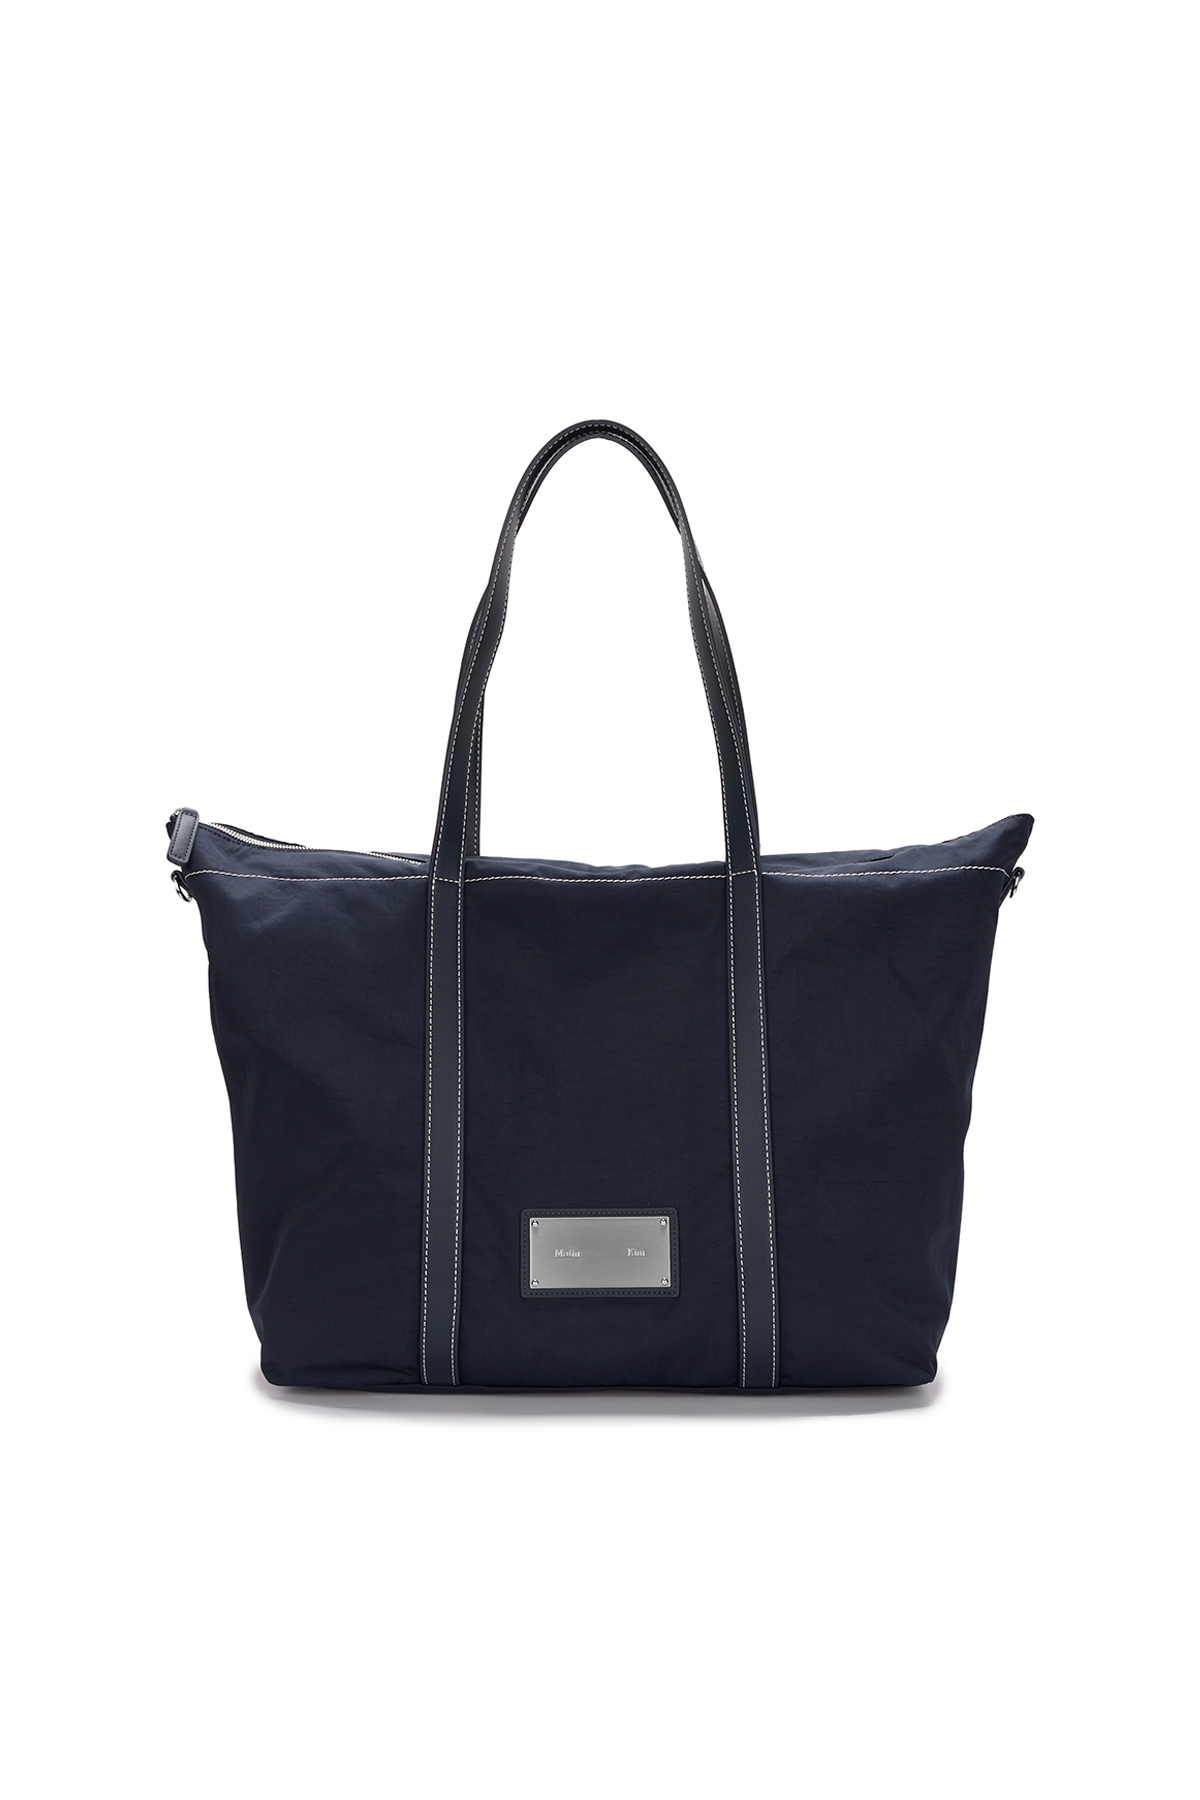 FABRIC NEW SHOPPER BAG IN NAVY